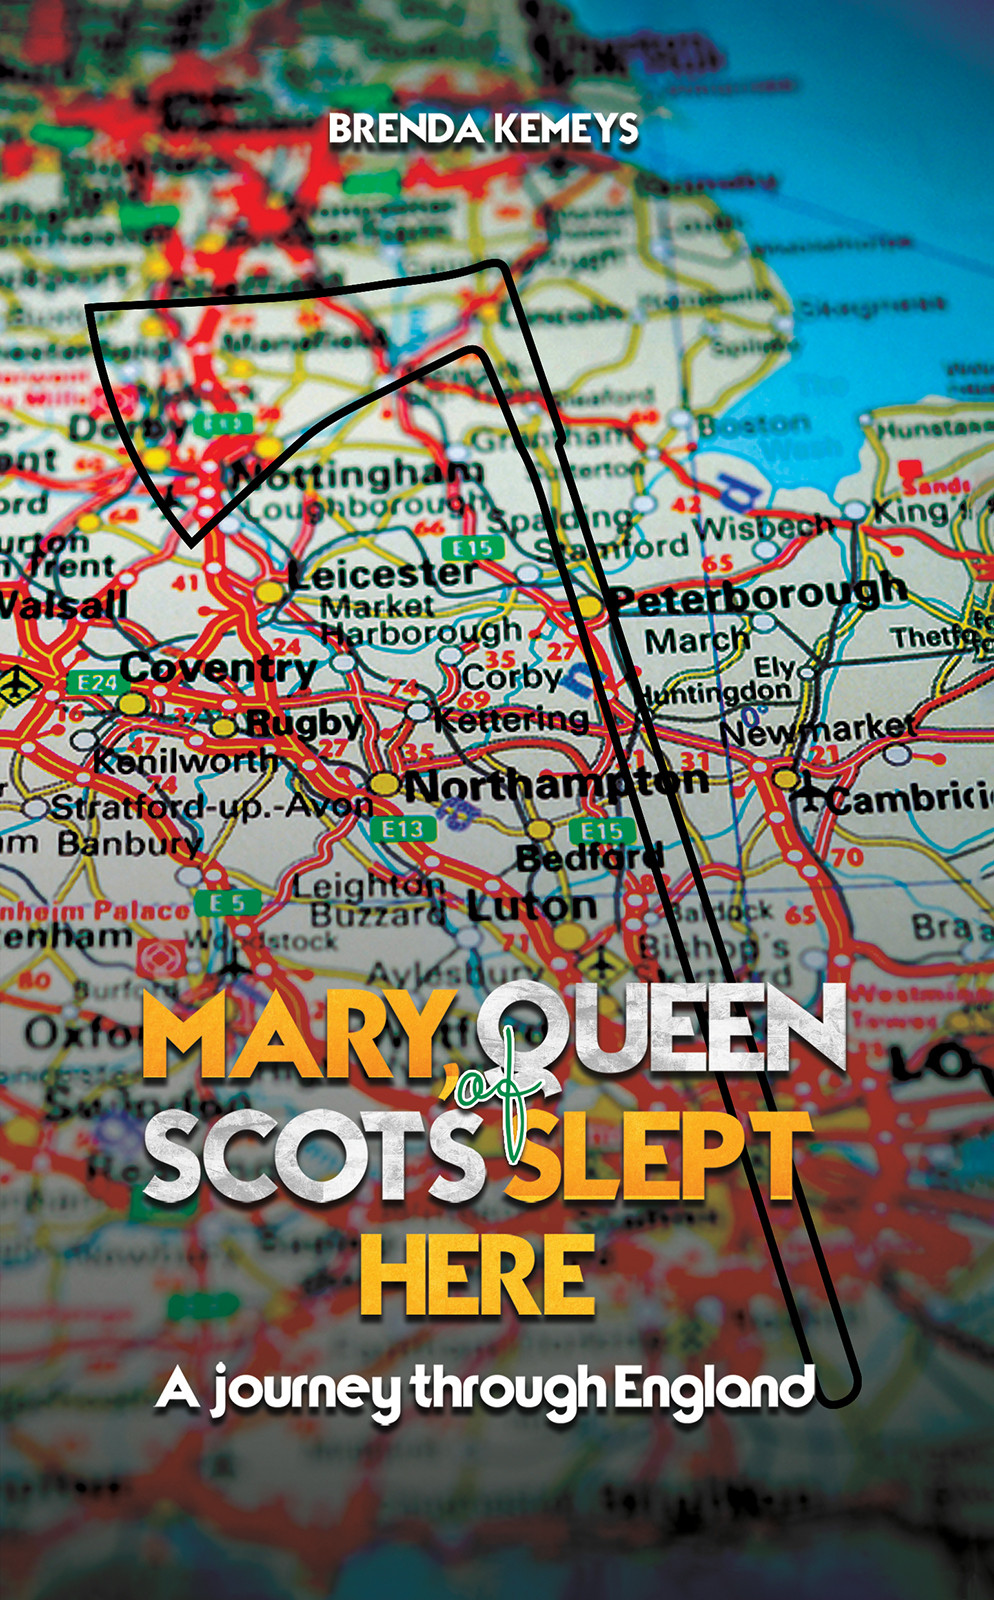 Mary, Queen of Scots Slept Here